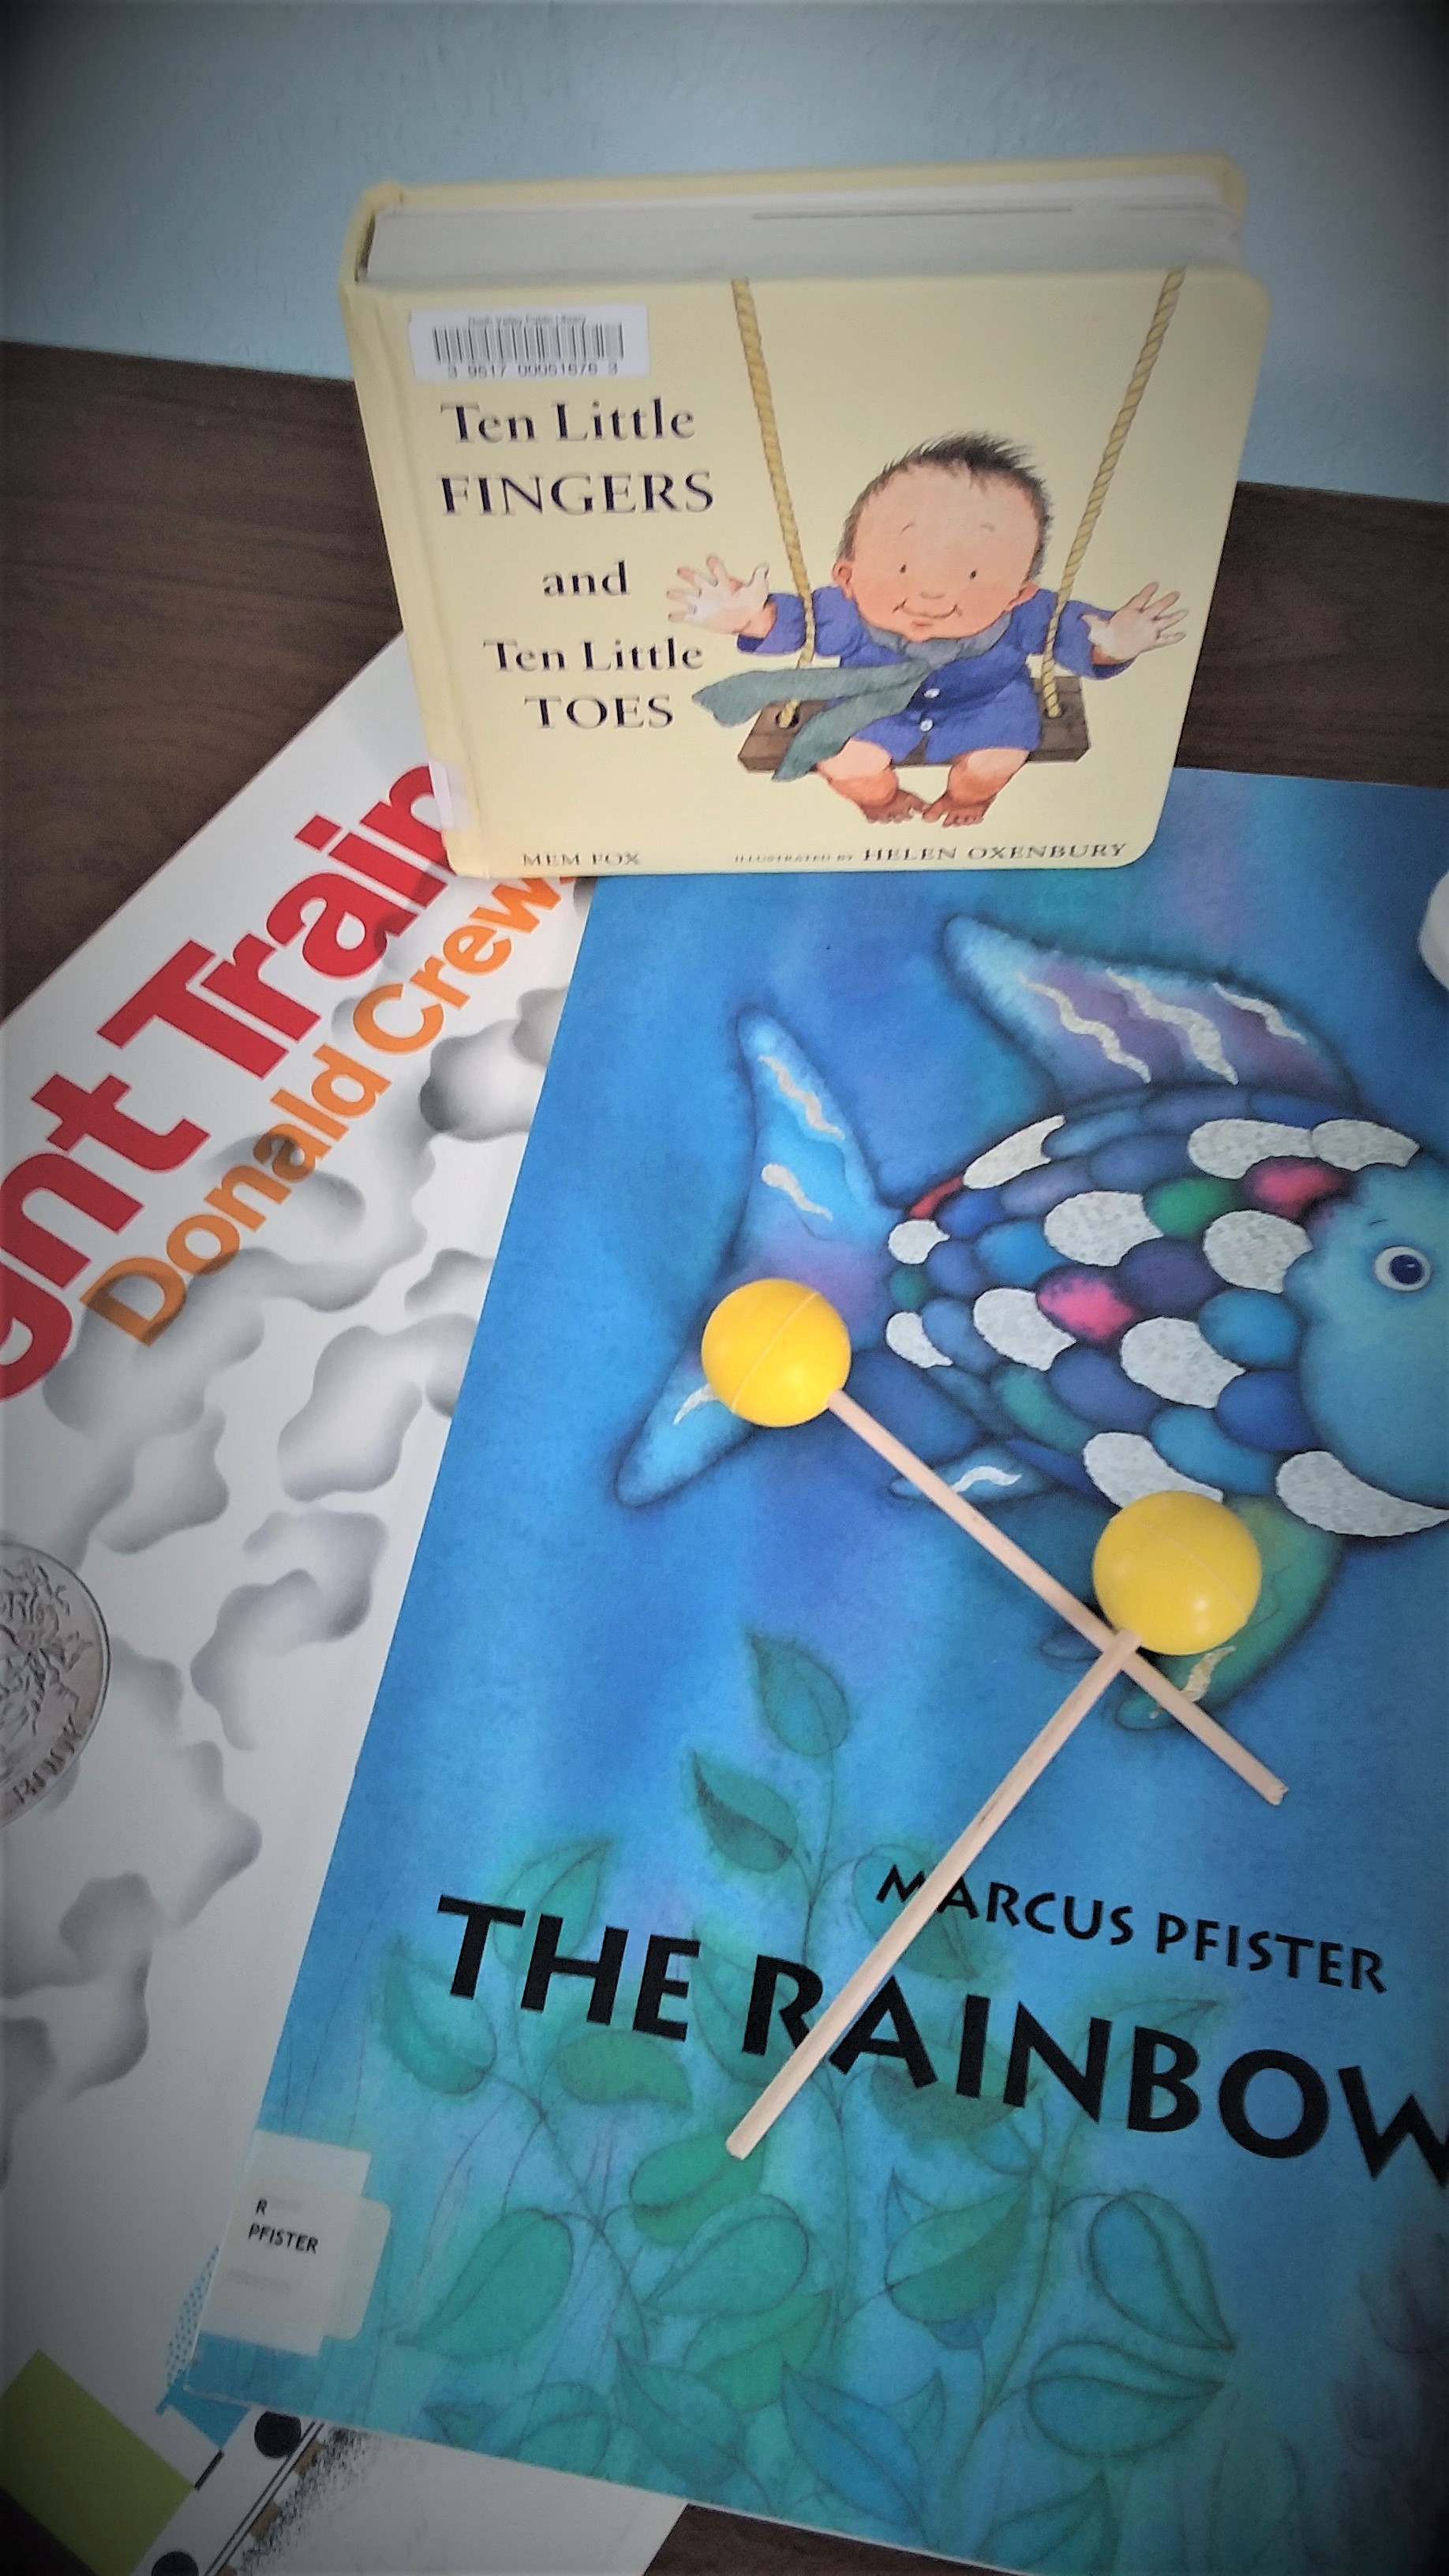 Books and activities for early literacy